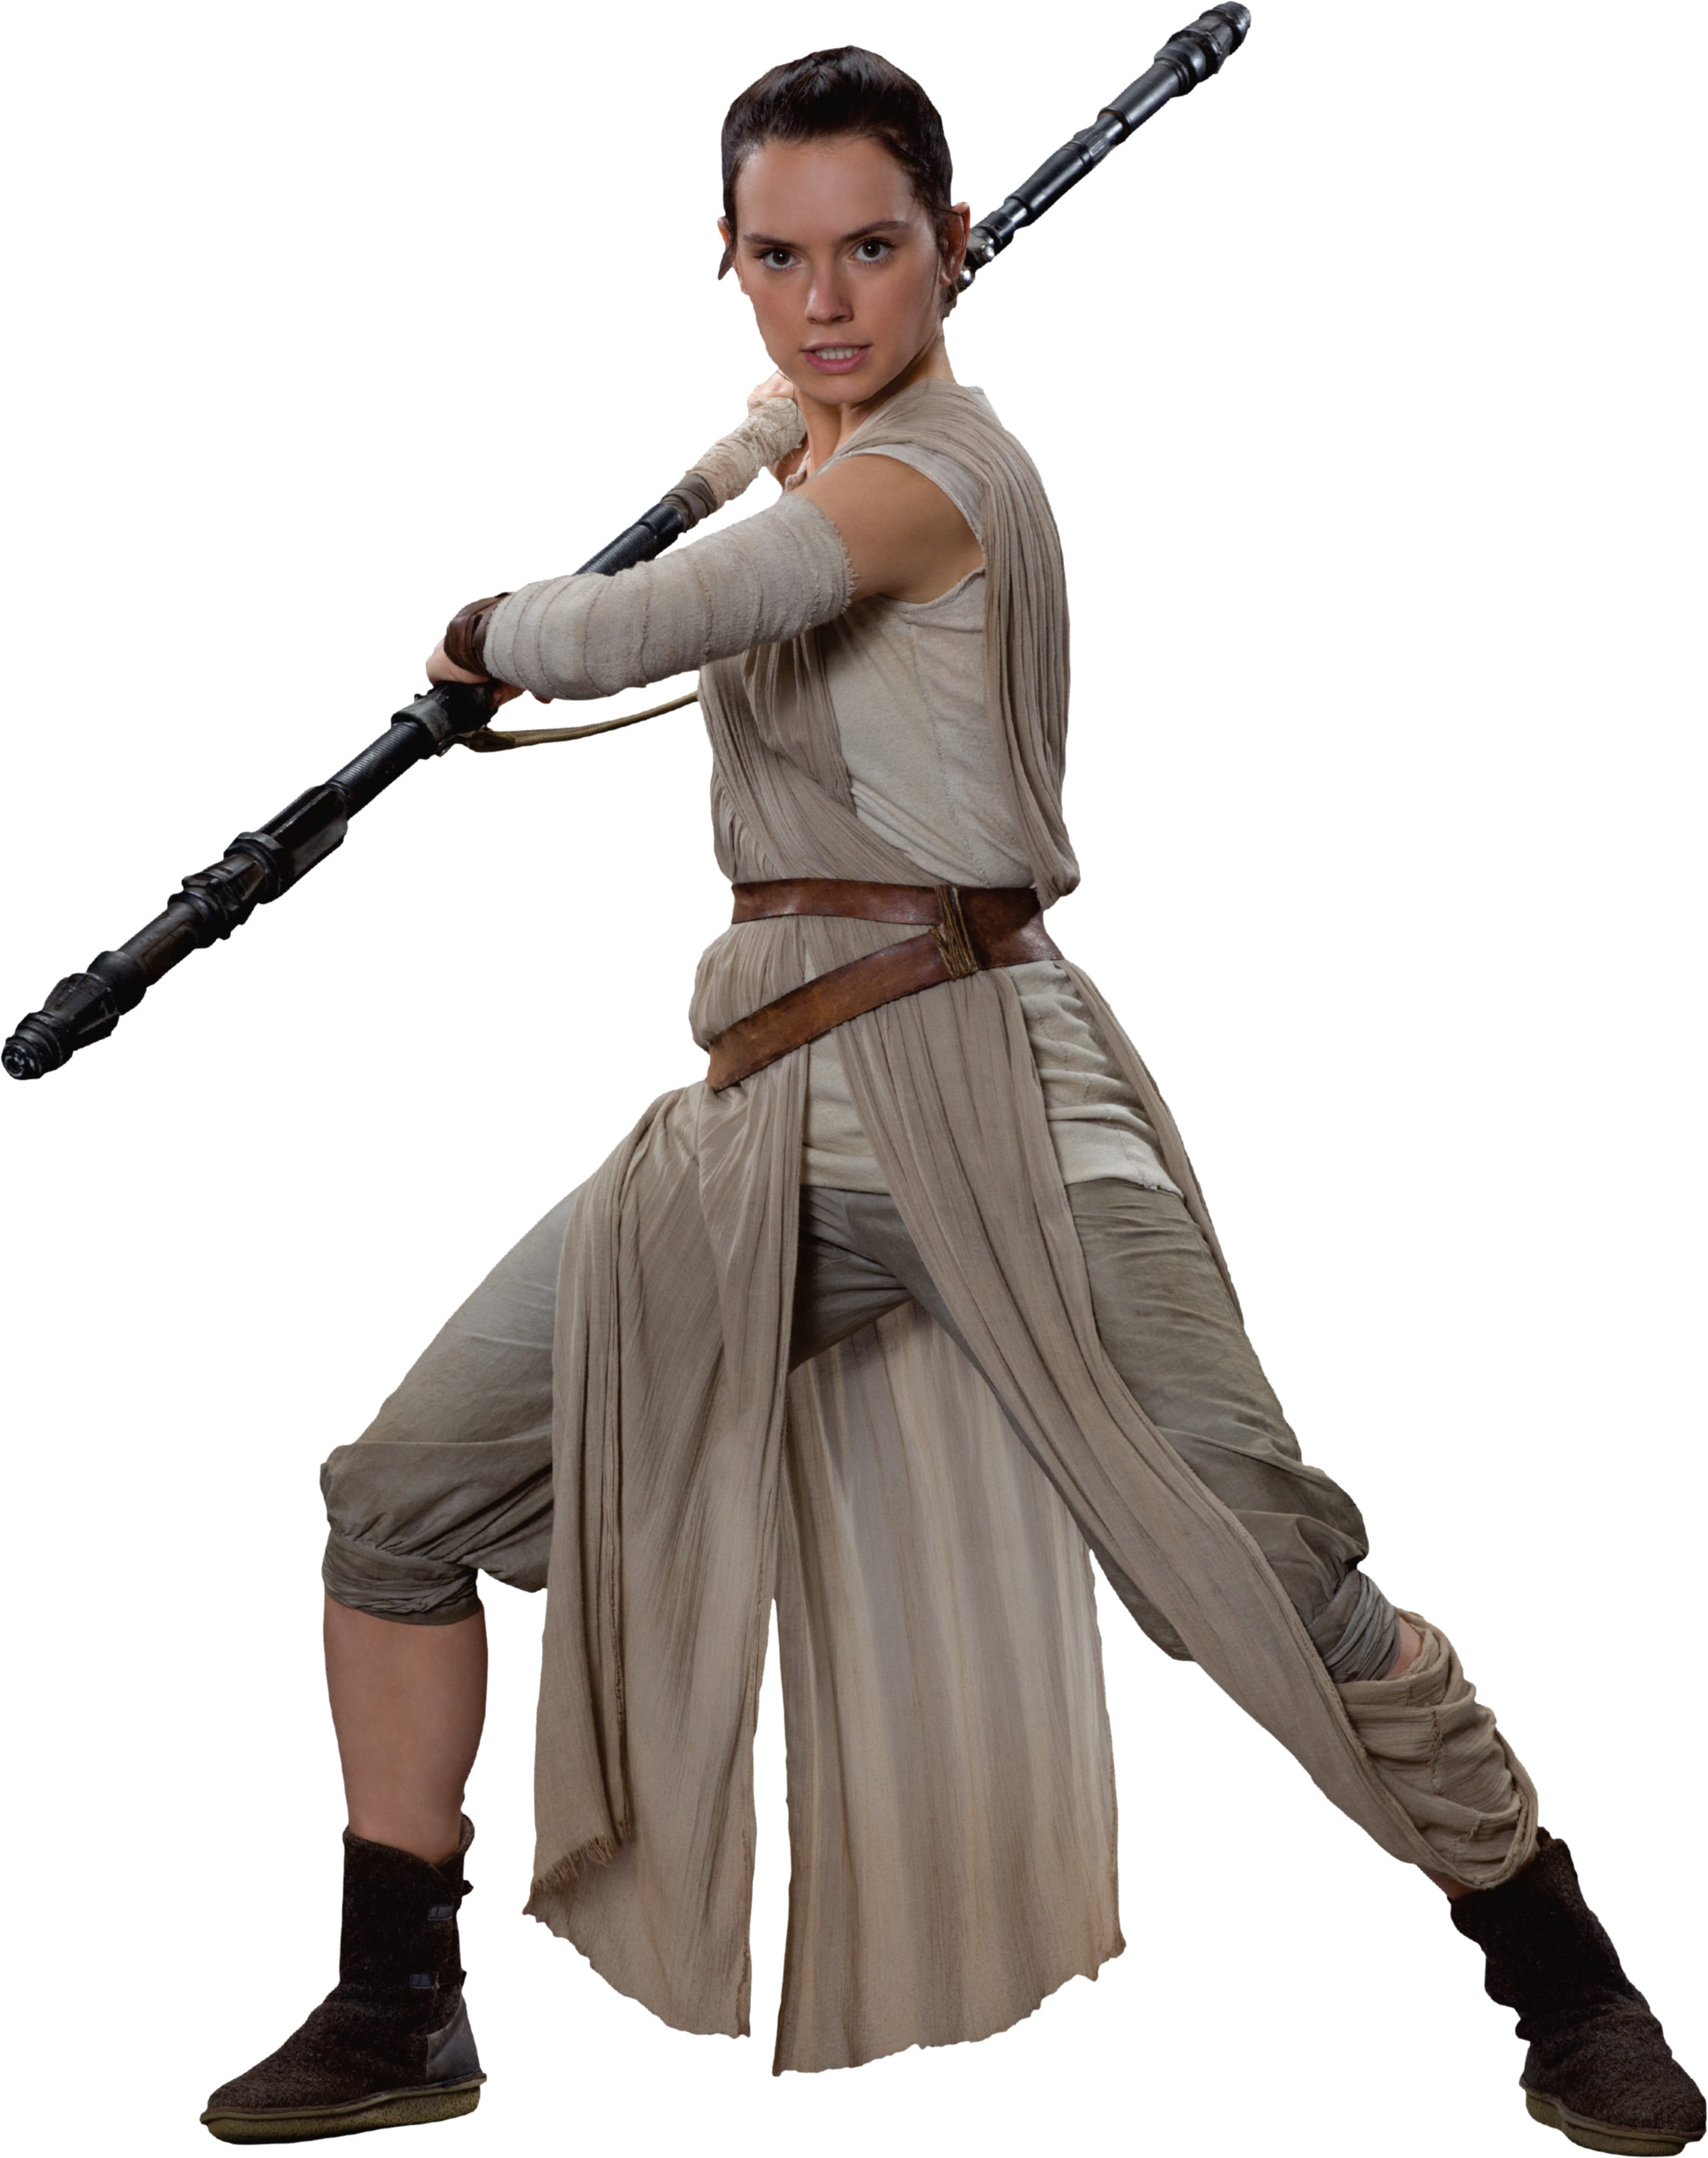 Rey – Star Wars The Force Awakens Build open for everyone